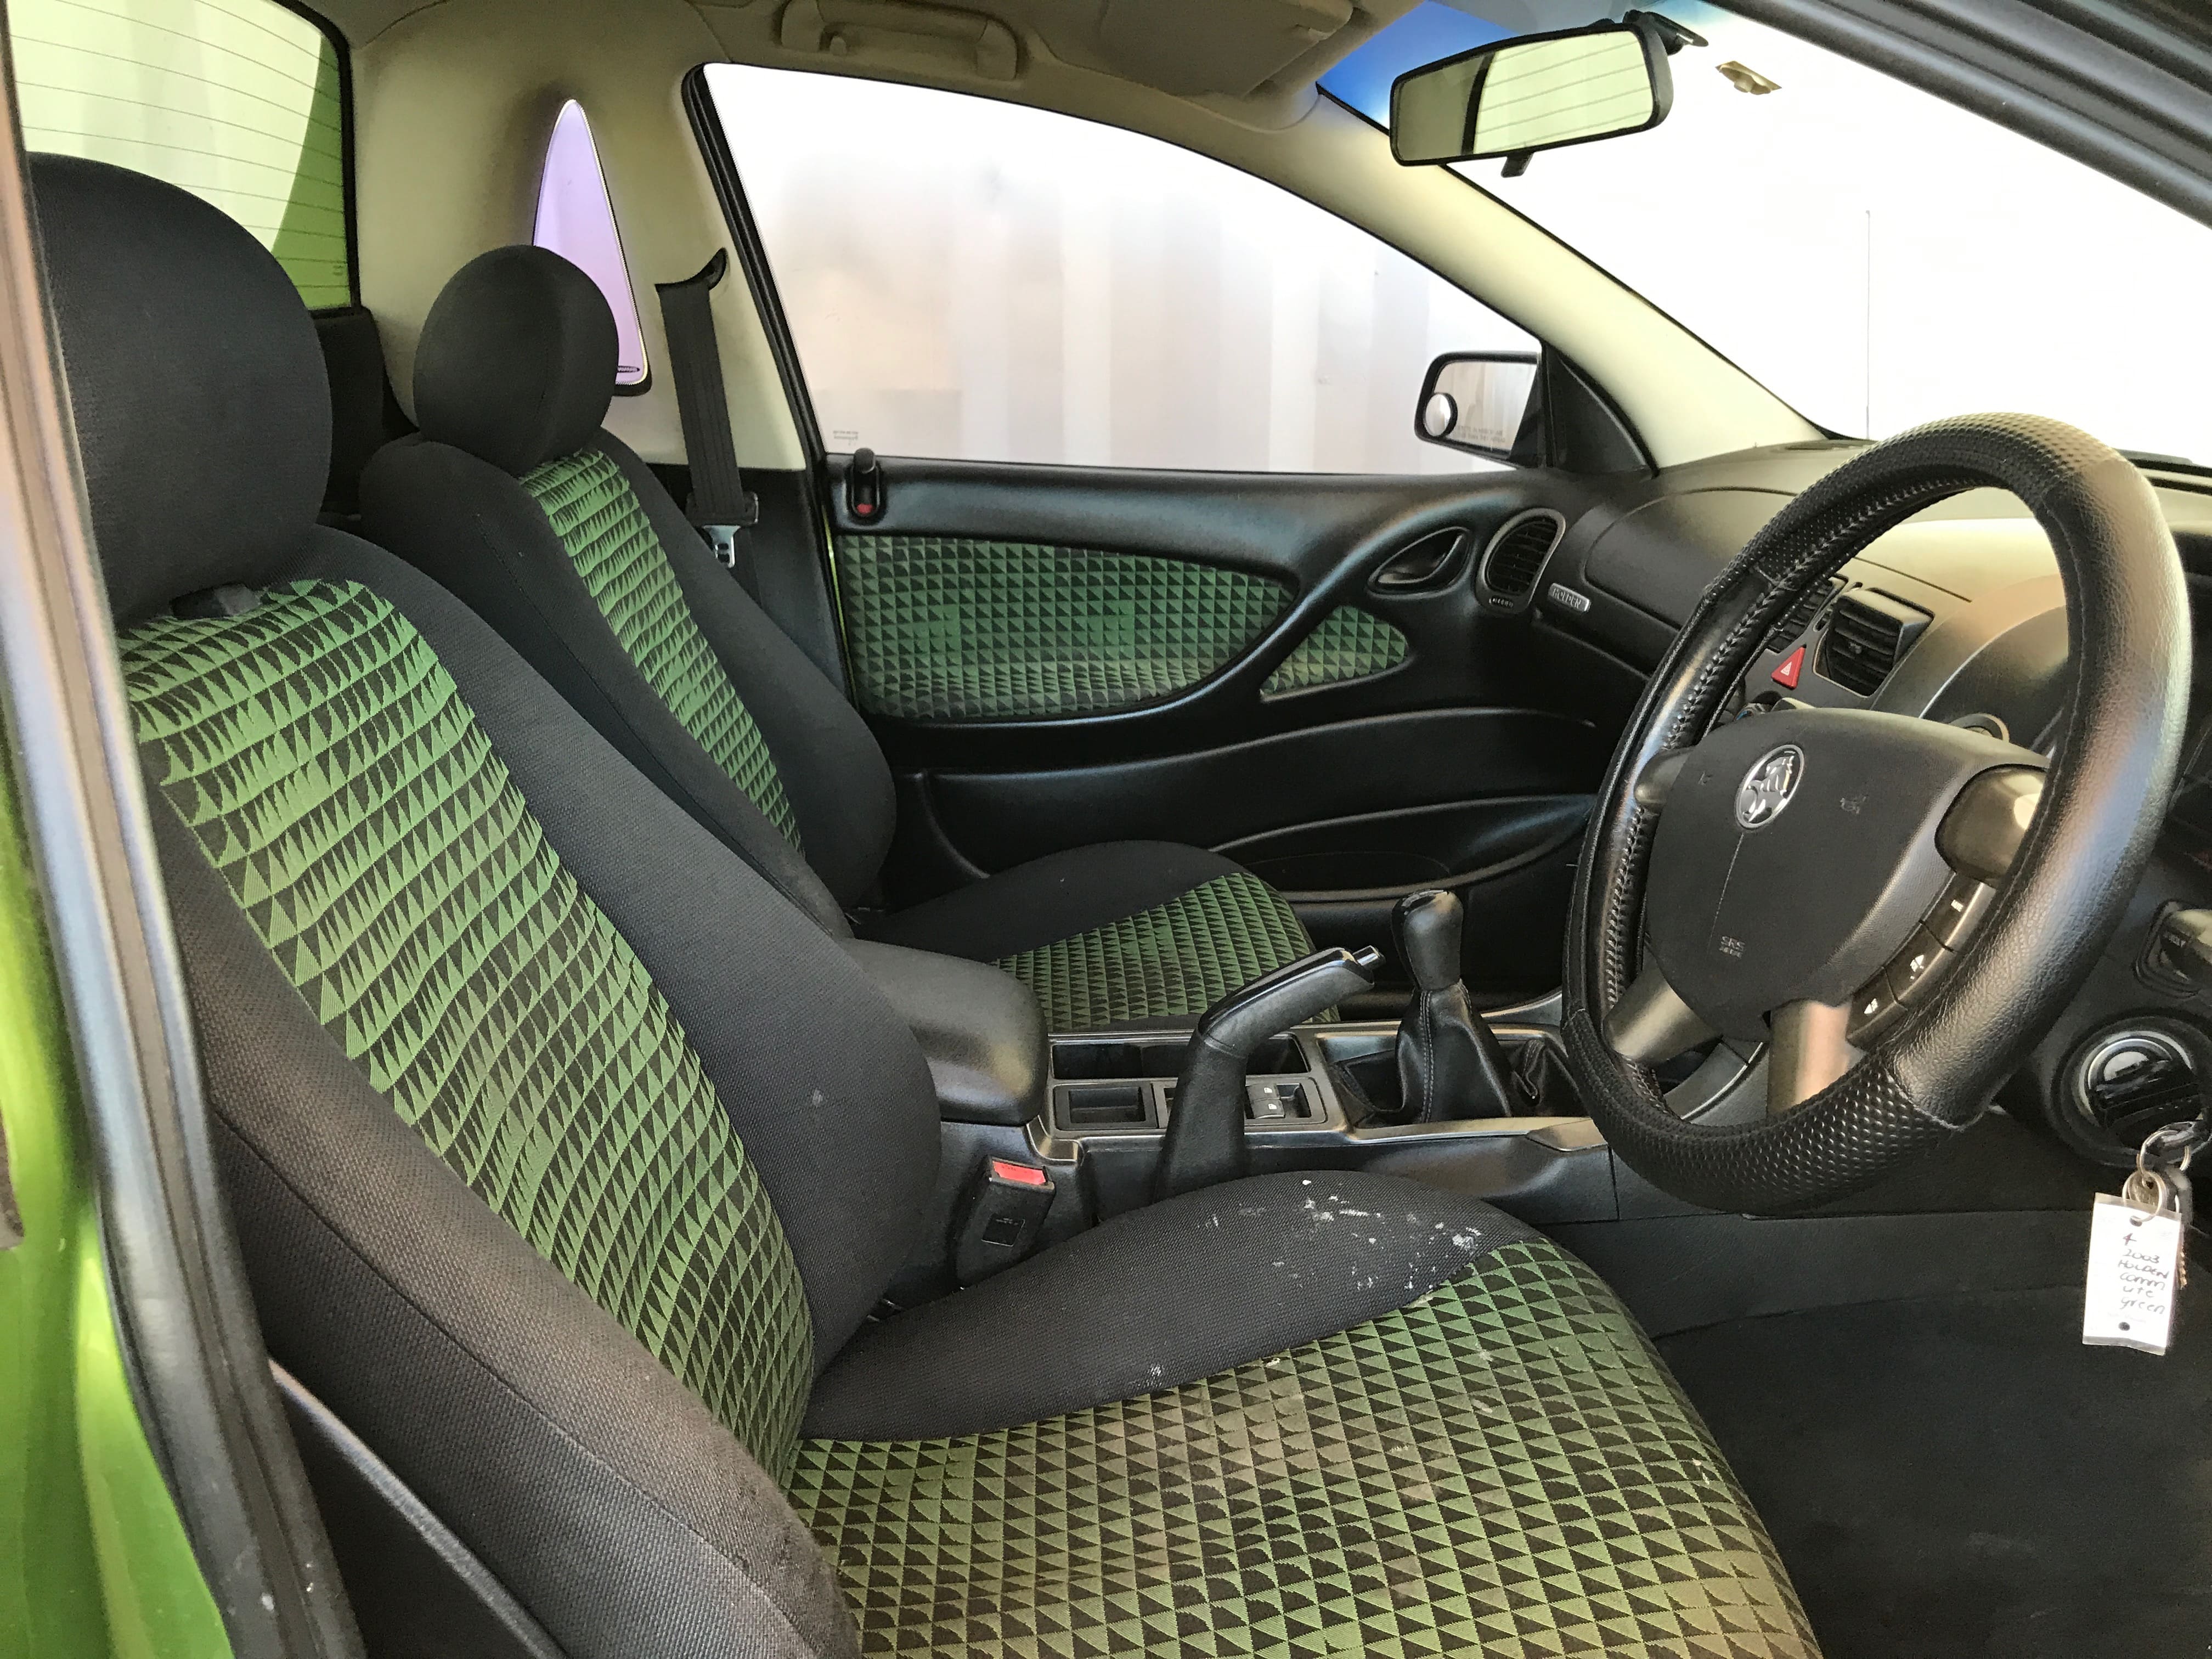 Holden Commodore Ute VY 2003 Green  11-min